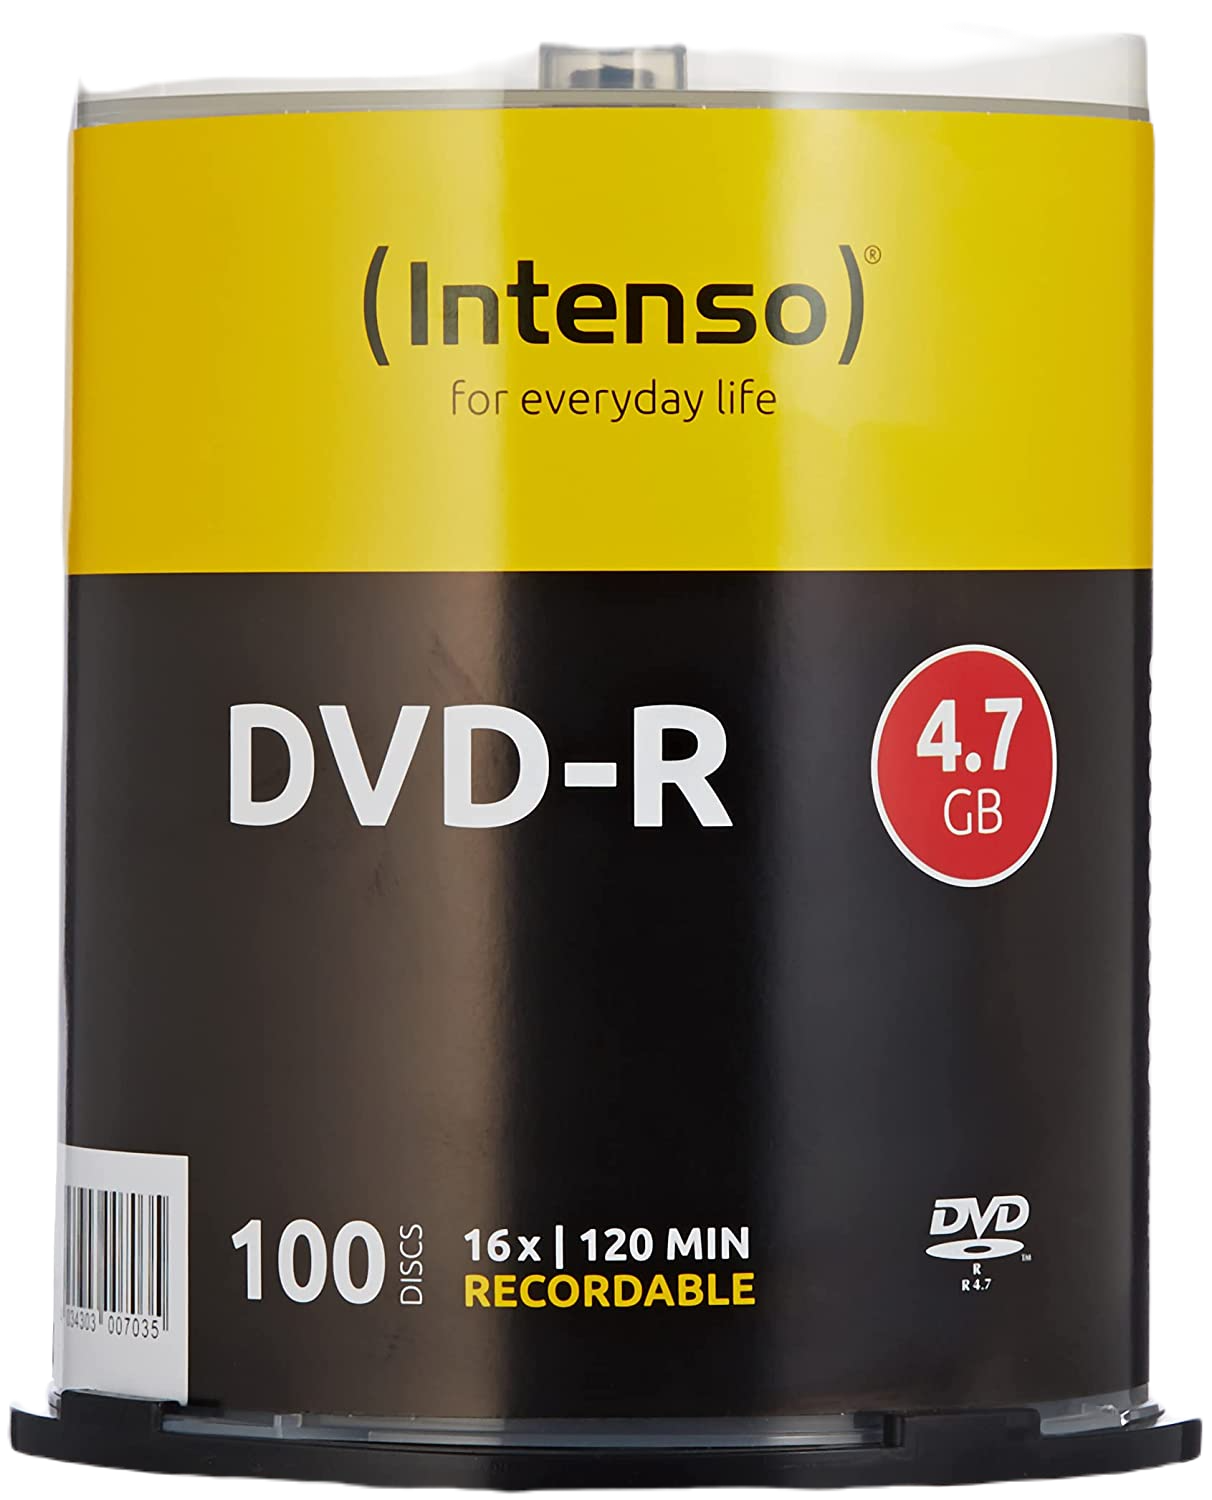 DVD+R 4.7 Gb - Spindle de 100 INTENSO